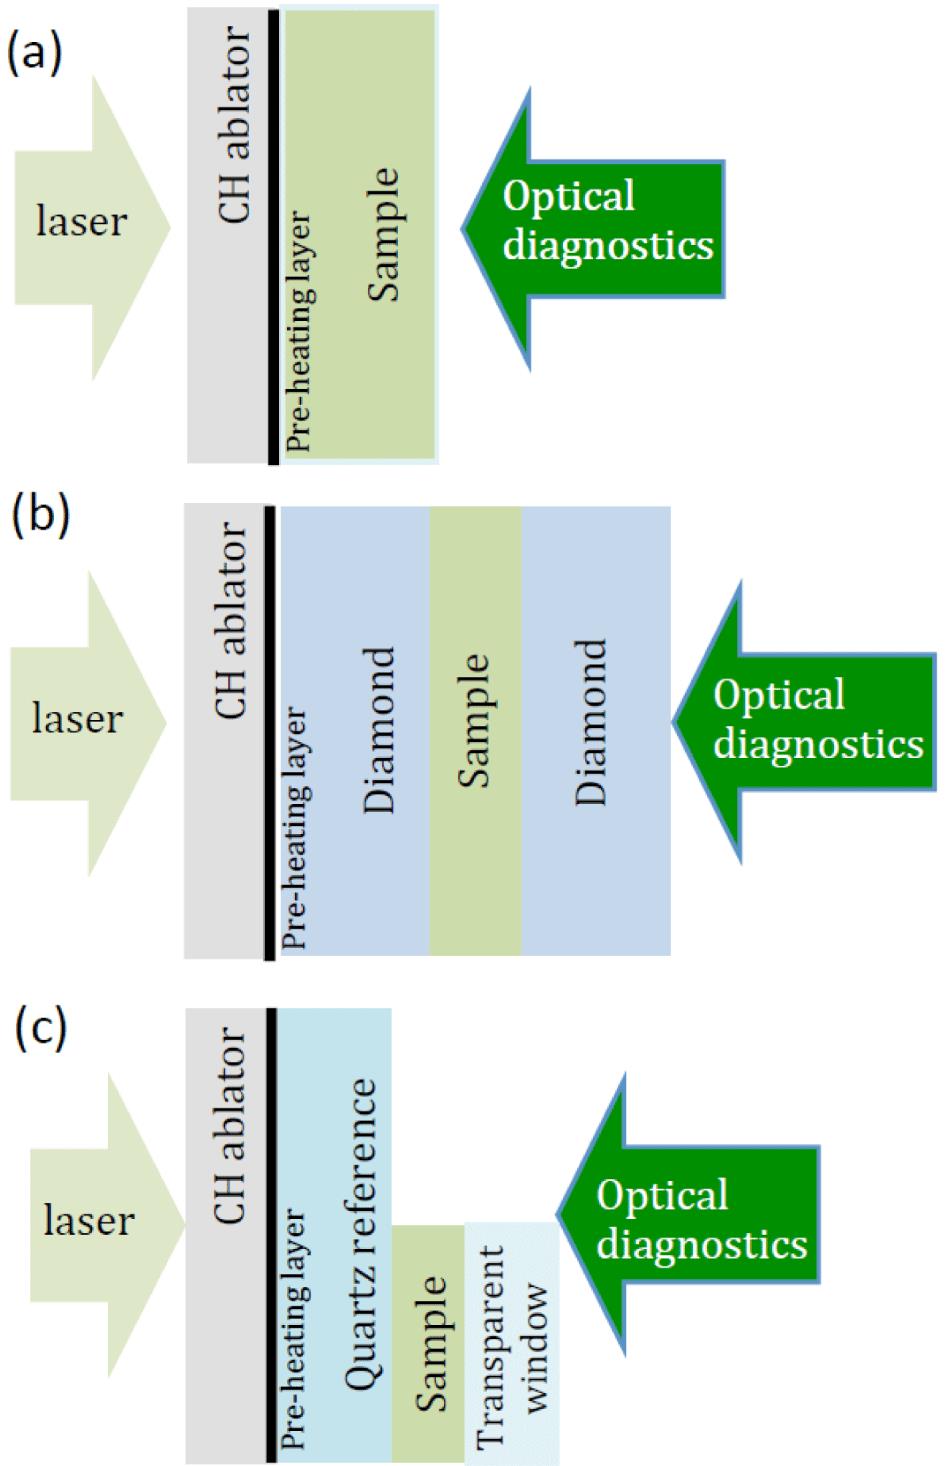 Examples of typical multilayer targets used for dynamic compression physics experiments: (a) in the simplest configuration the sample is coated with a low-Z layer (ablator), and occasionally with a preheat layer; (b) placing the sample layer between solid plates prevents expansion and maintains high-pressure conditions longer; (c) complex sample allows measurement of shock pressure by VISAR reflection from pressure standard (quartz) while also containing the sample.